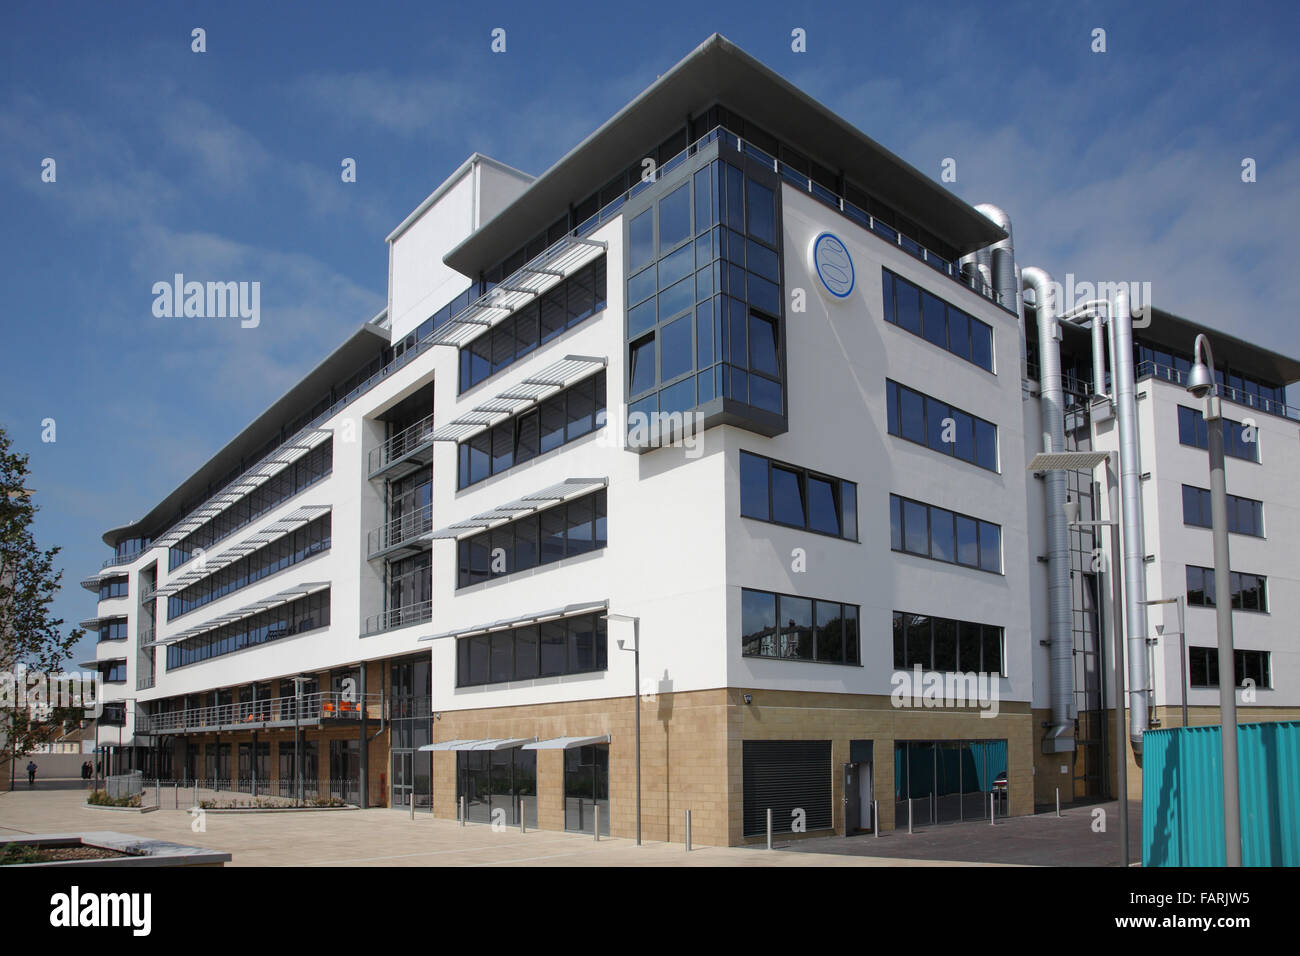 External view of Sussex Coast College, Hastings, UK. A new, architecturally striking Further Education college. Stock Photo